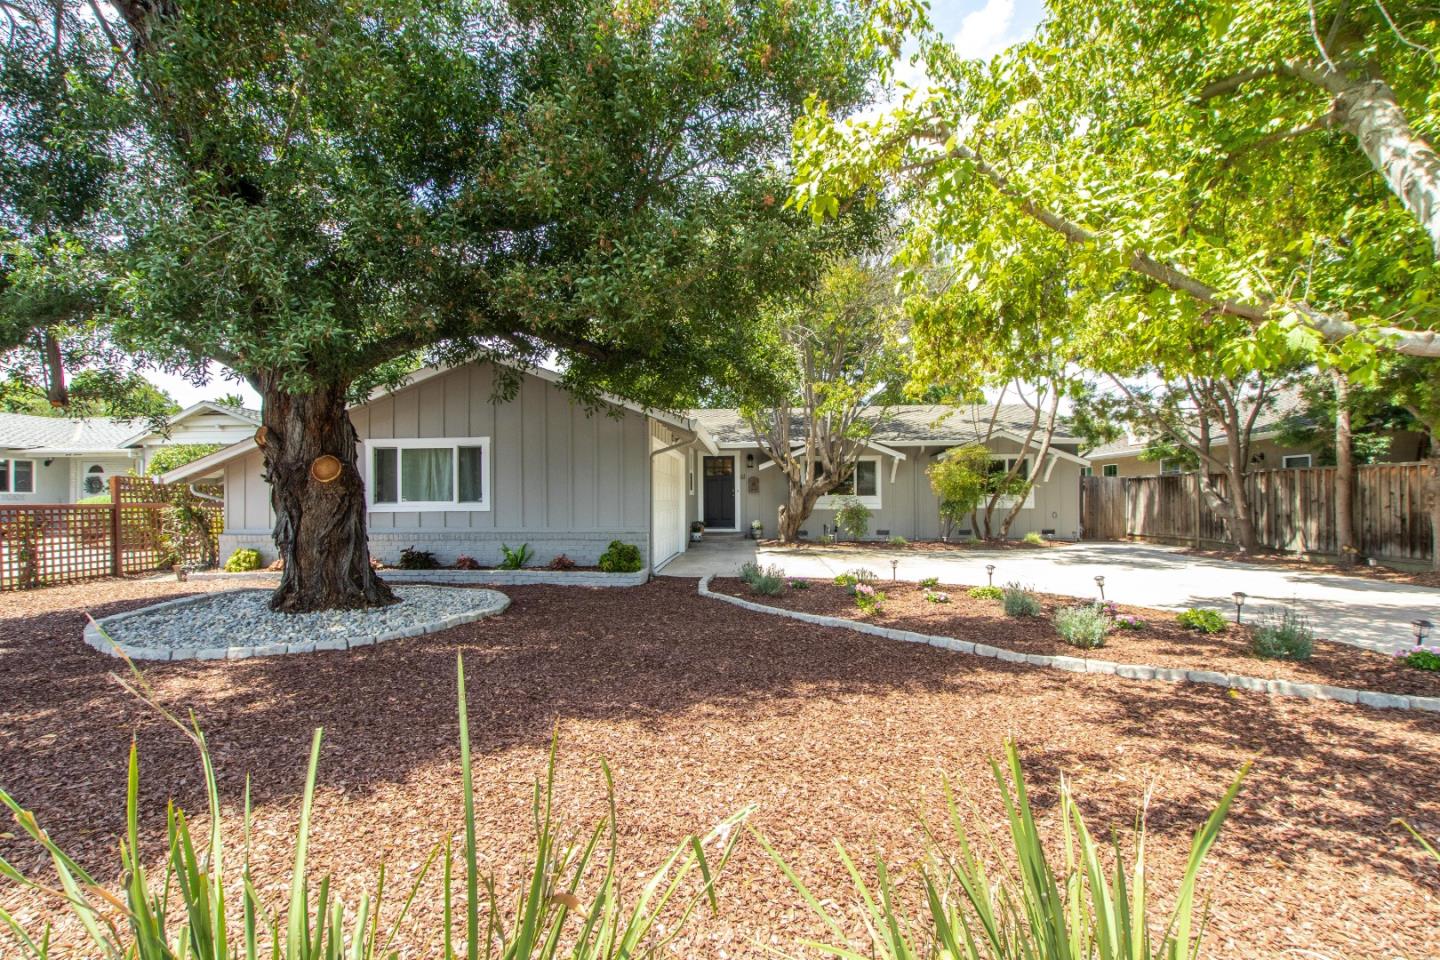 61 N Leigh AVE, CAMPBELL, CA 95008